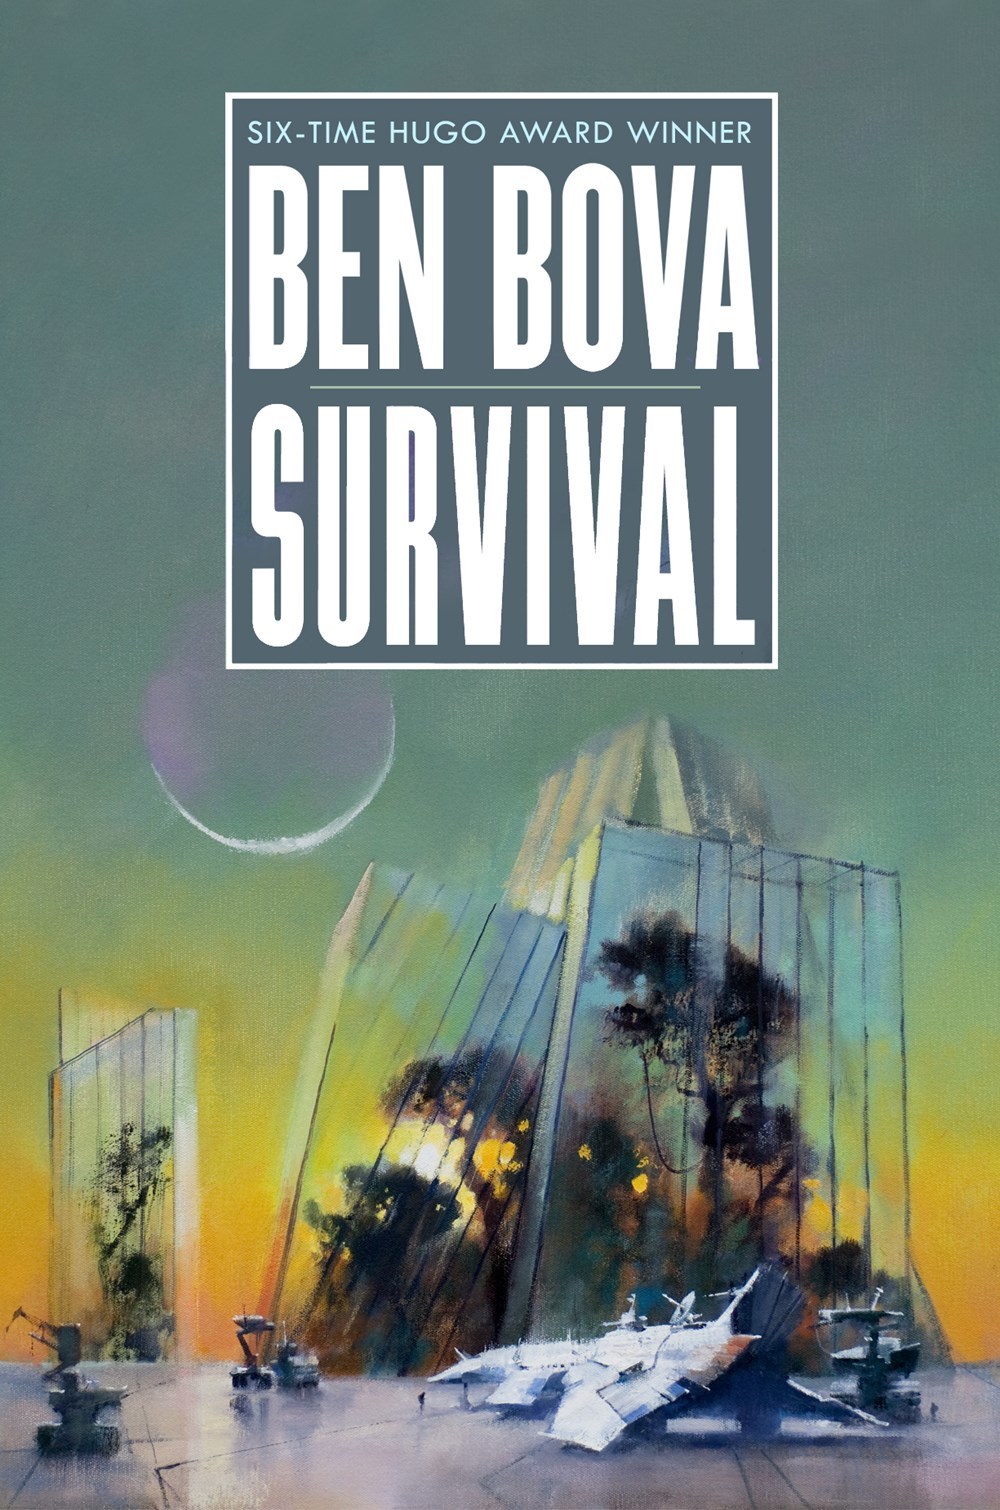 BOOK REVIEW: Survival, by Ben Bova